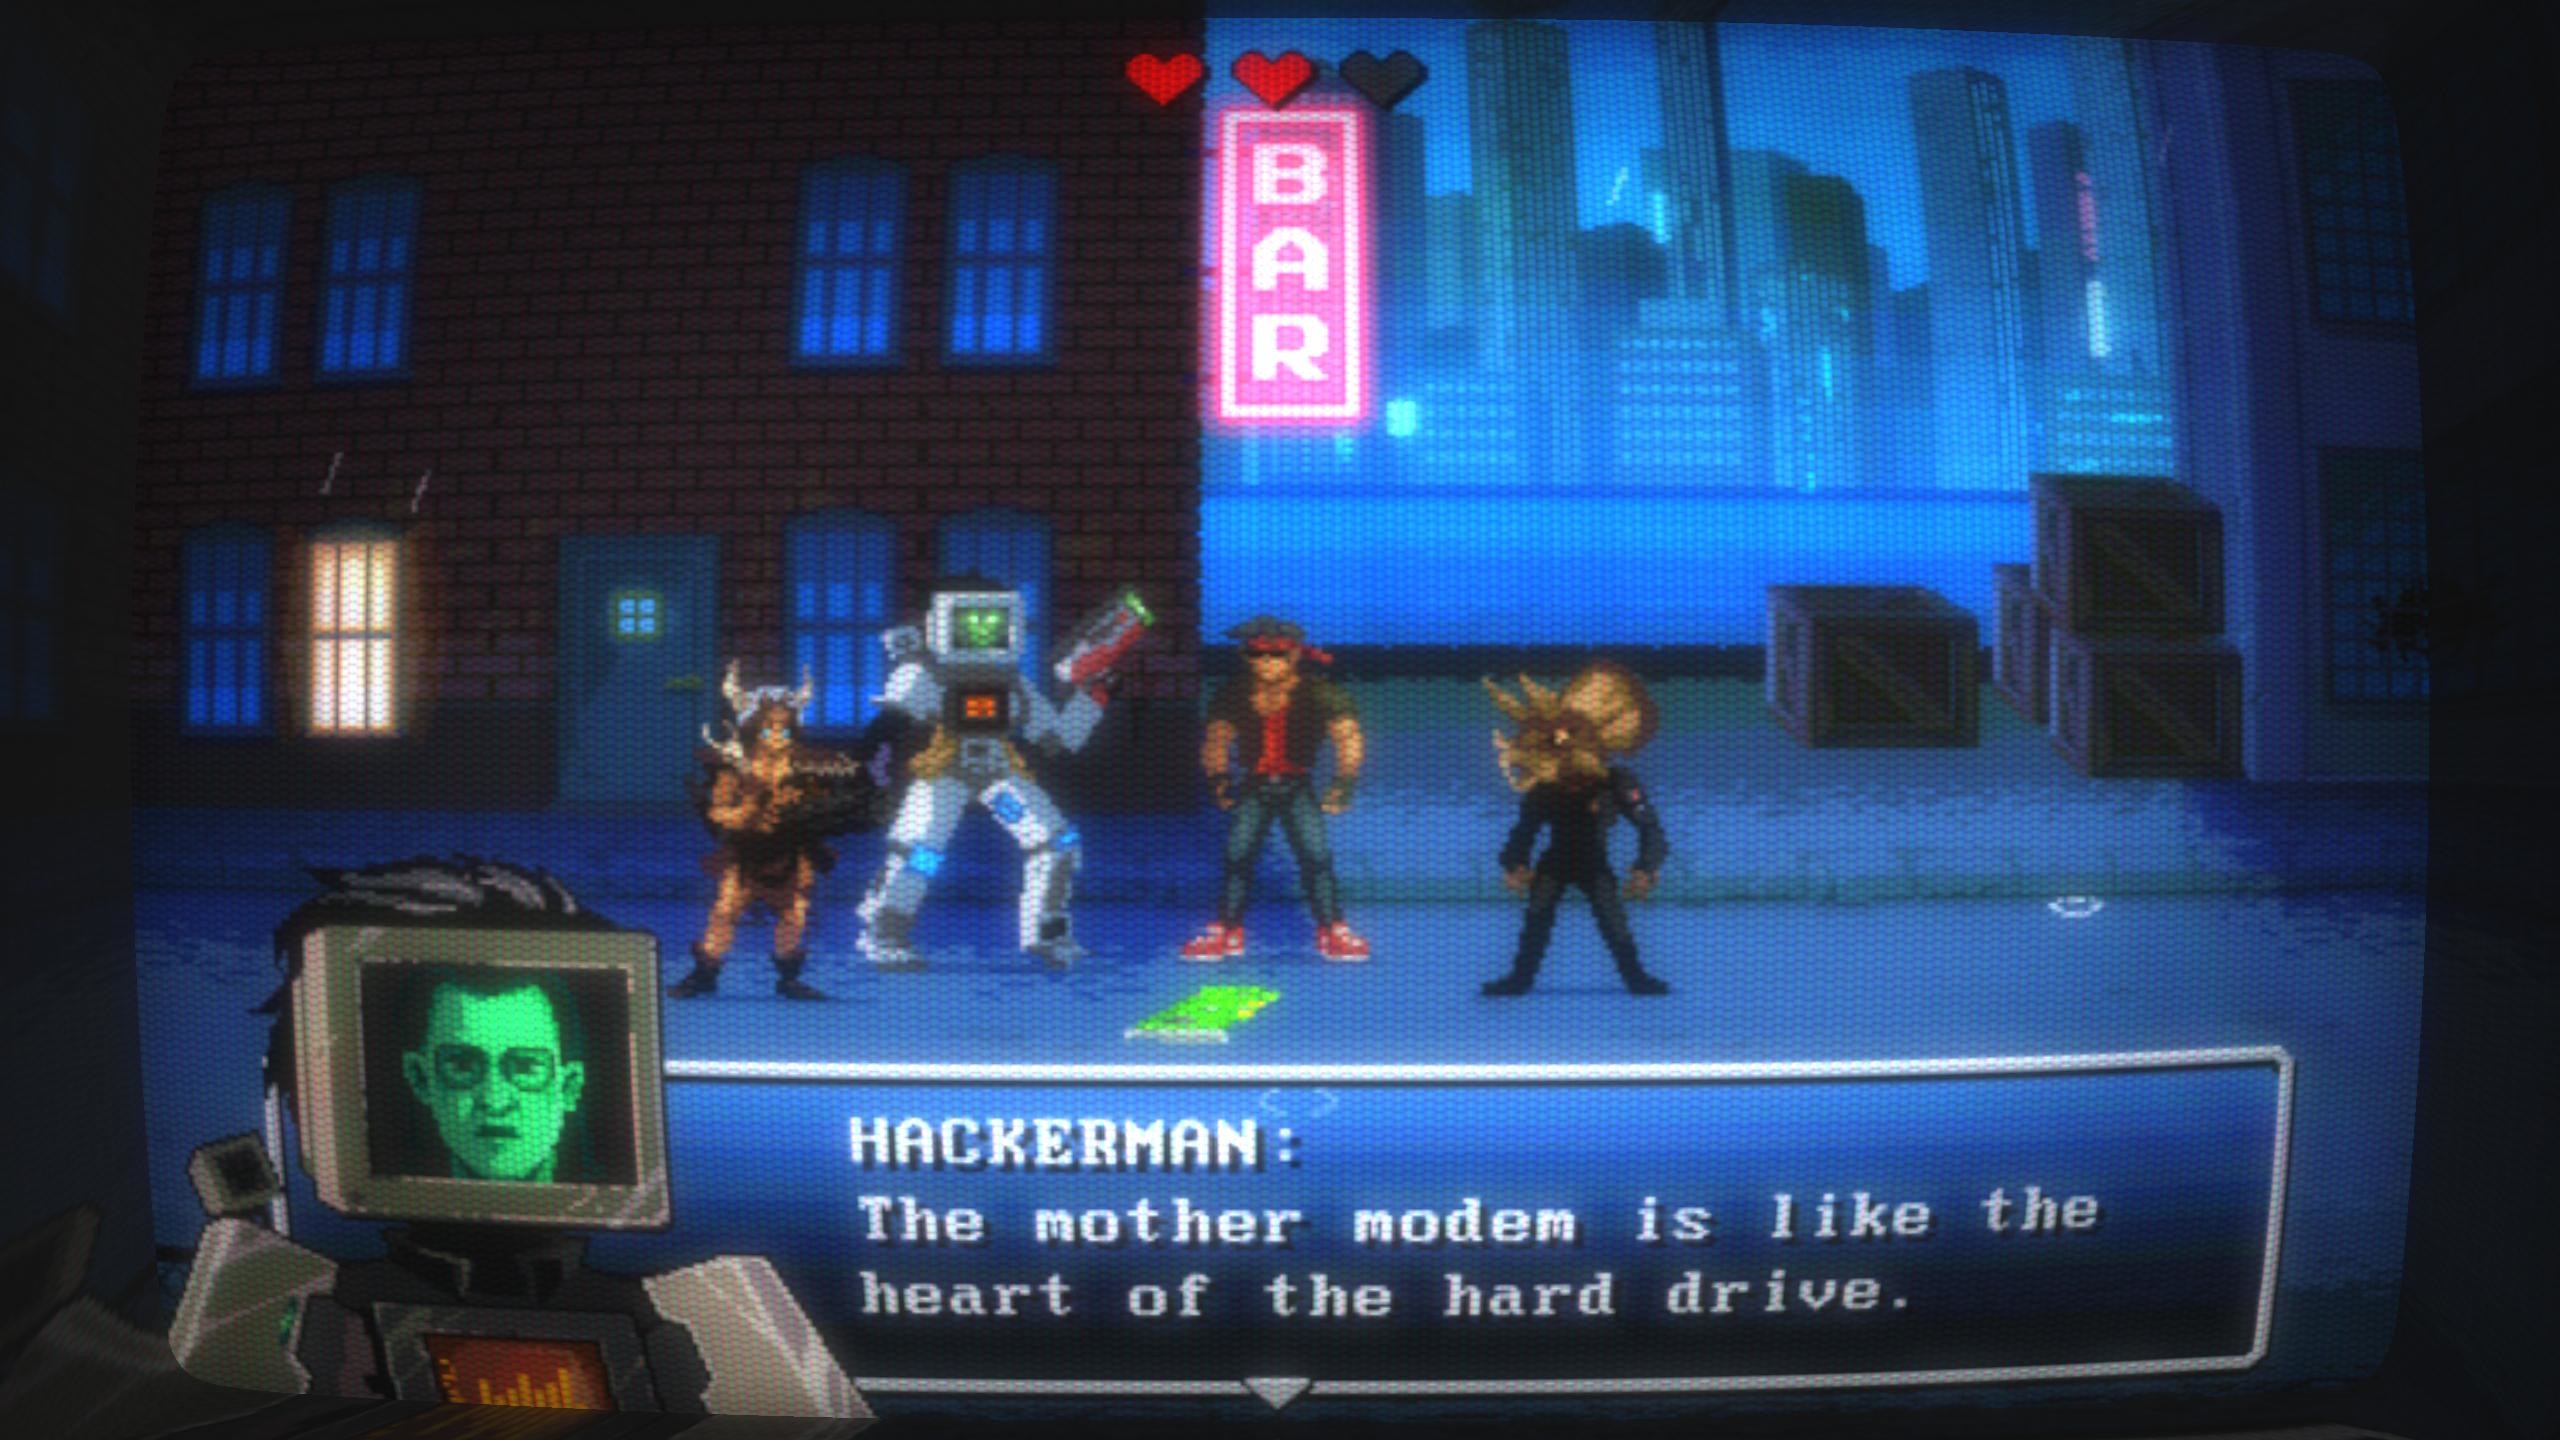 An hour after seeing the Mother Modem post, I saw this in the Kung Fury